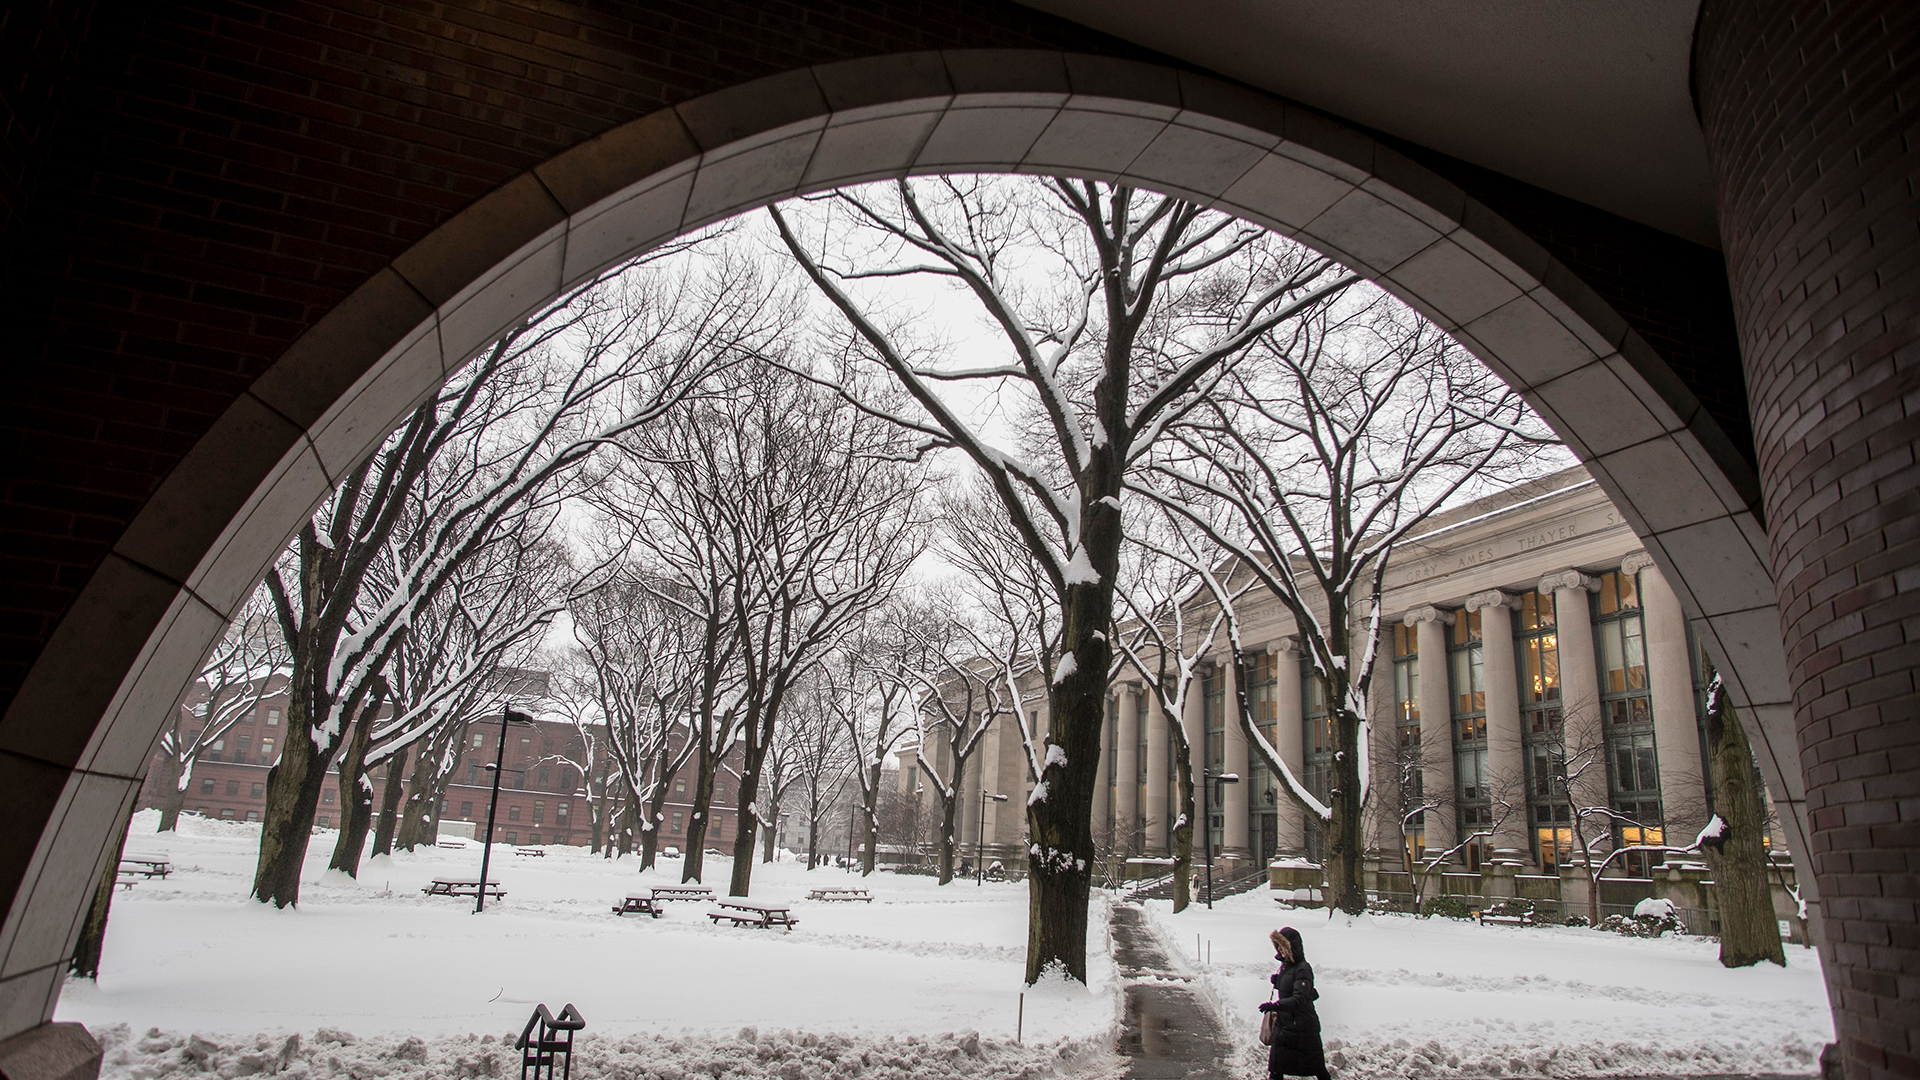 View of Langdell in the snow through Hauser arch